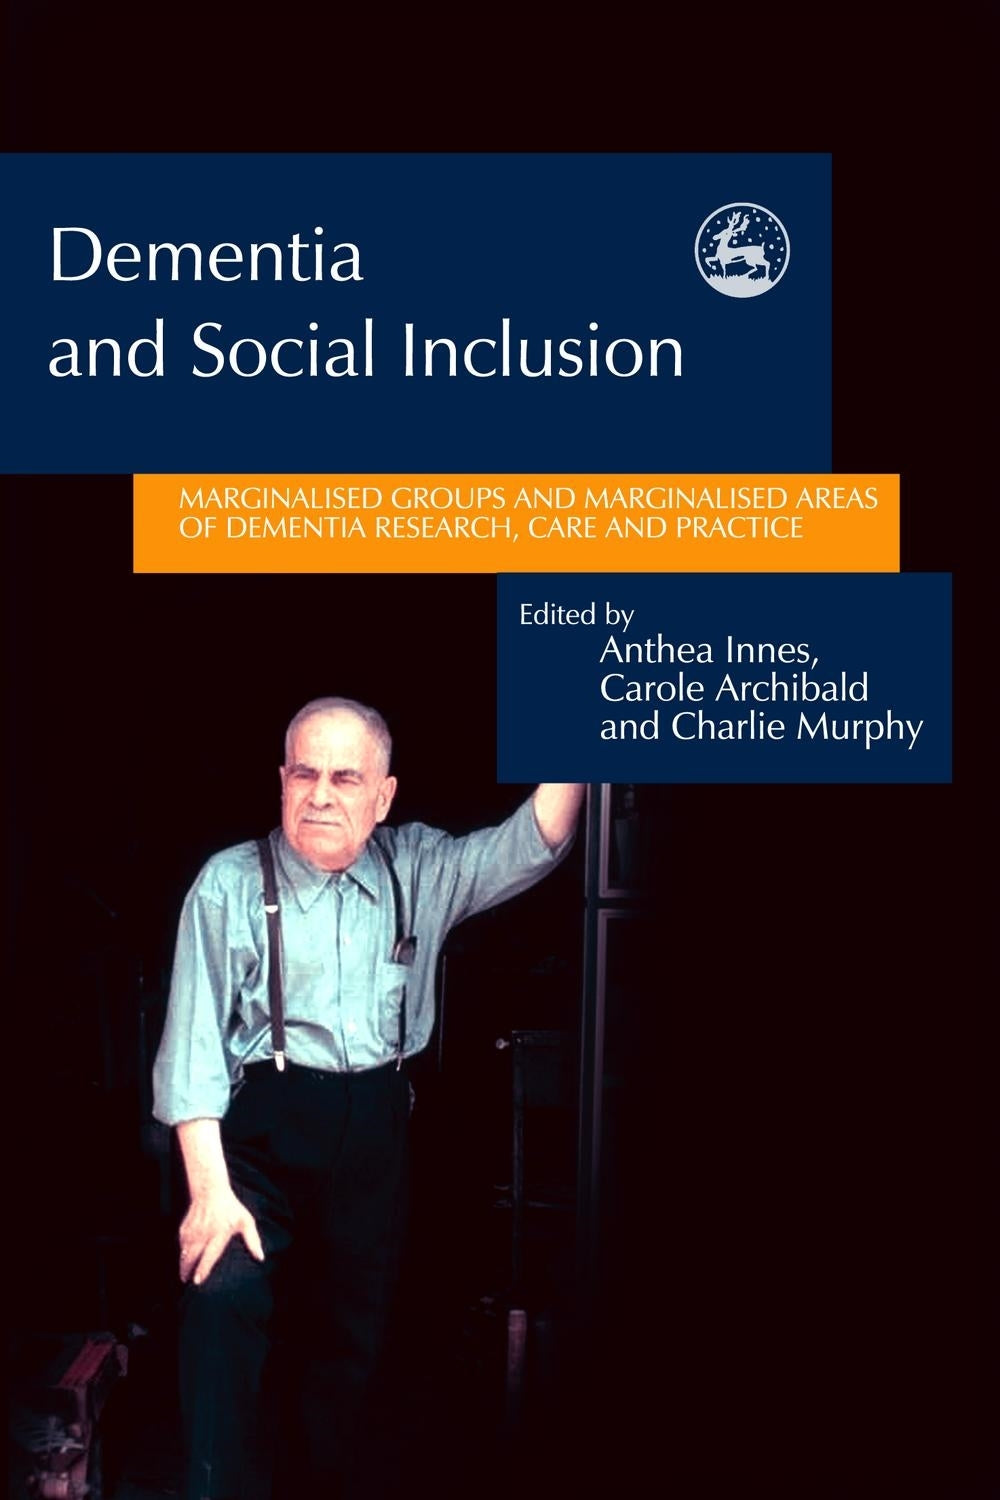 Dementia and Social Inclusion by Charlie Murphy, Anthea Innes, Carole Archibald